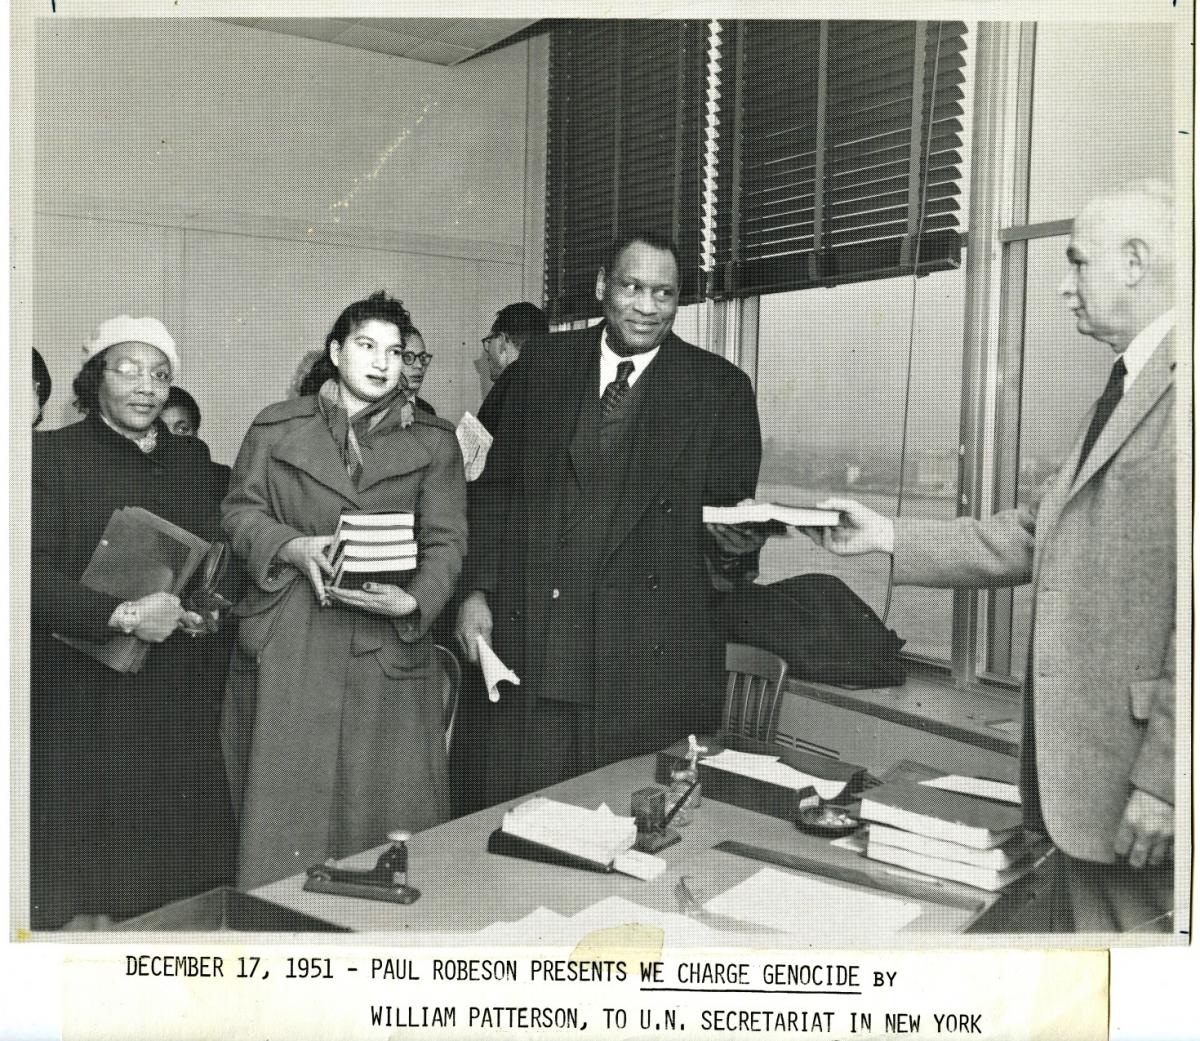 Paul Robeson and other members of the Civil Rights Congress submit 'We Charge Genocide,' a report on police brutality, to the United Nations Secretariat in New York in 1951.